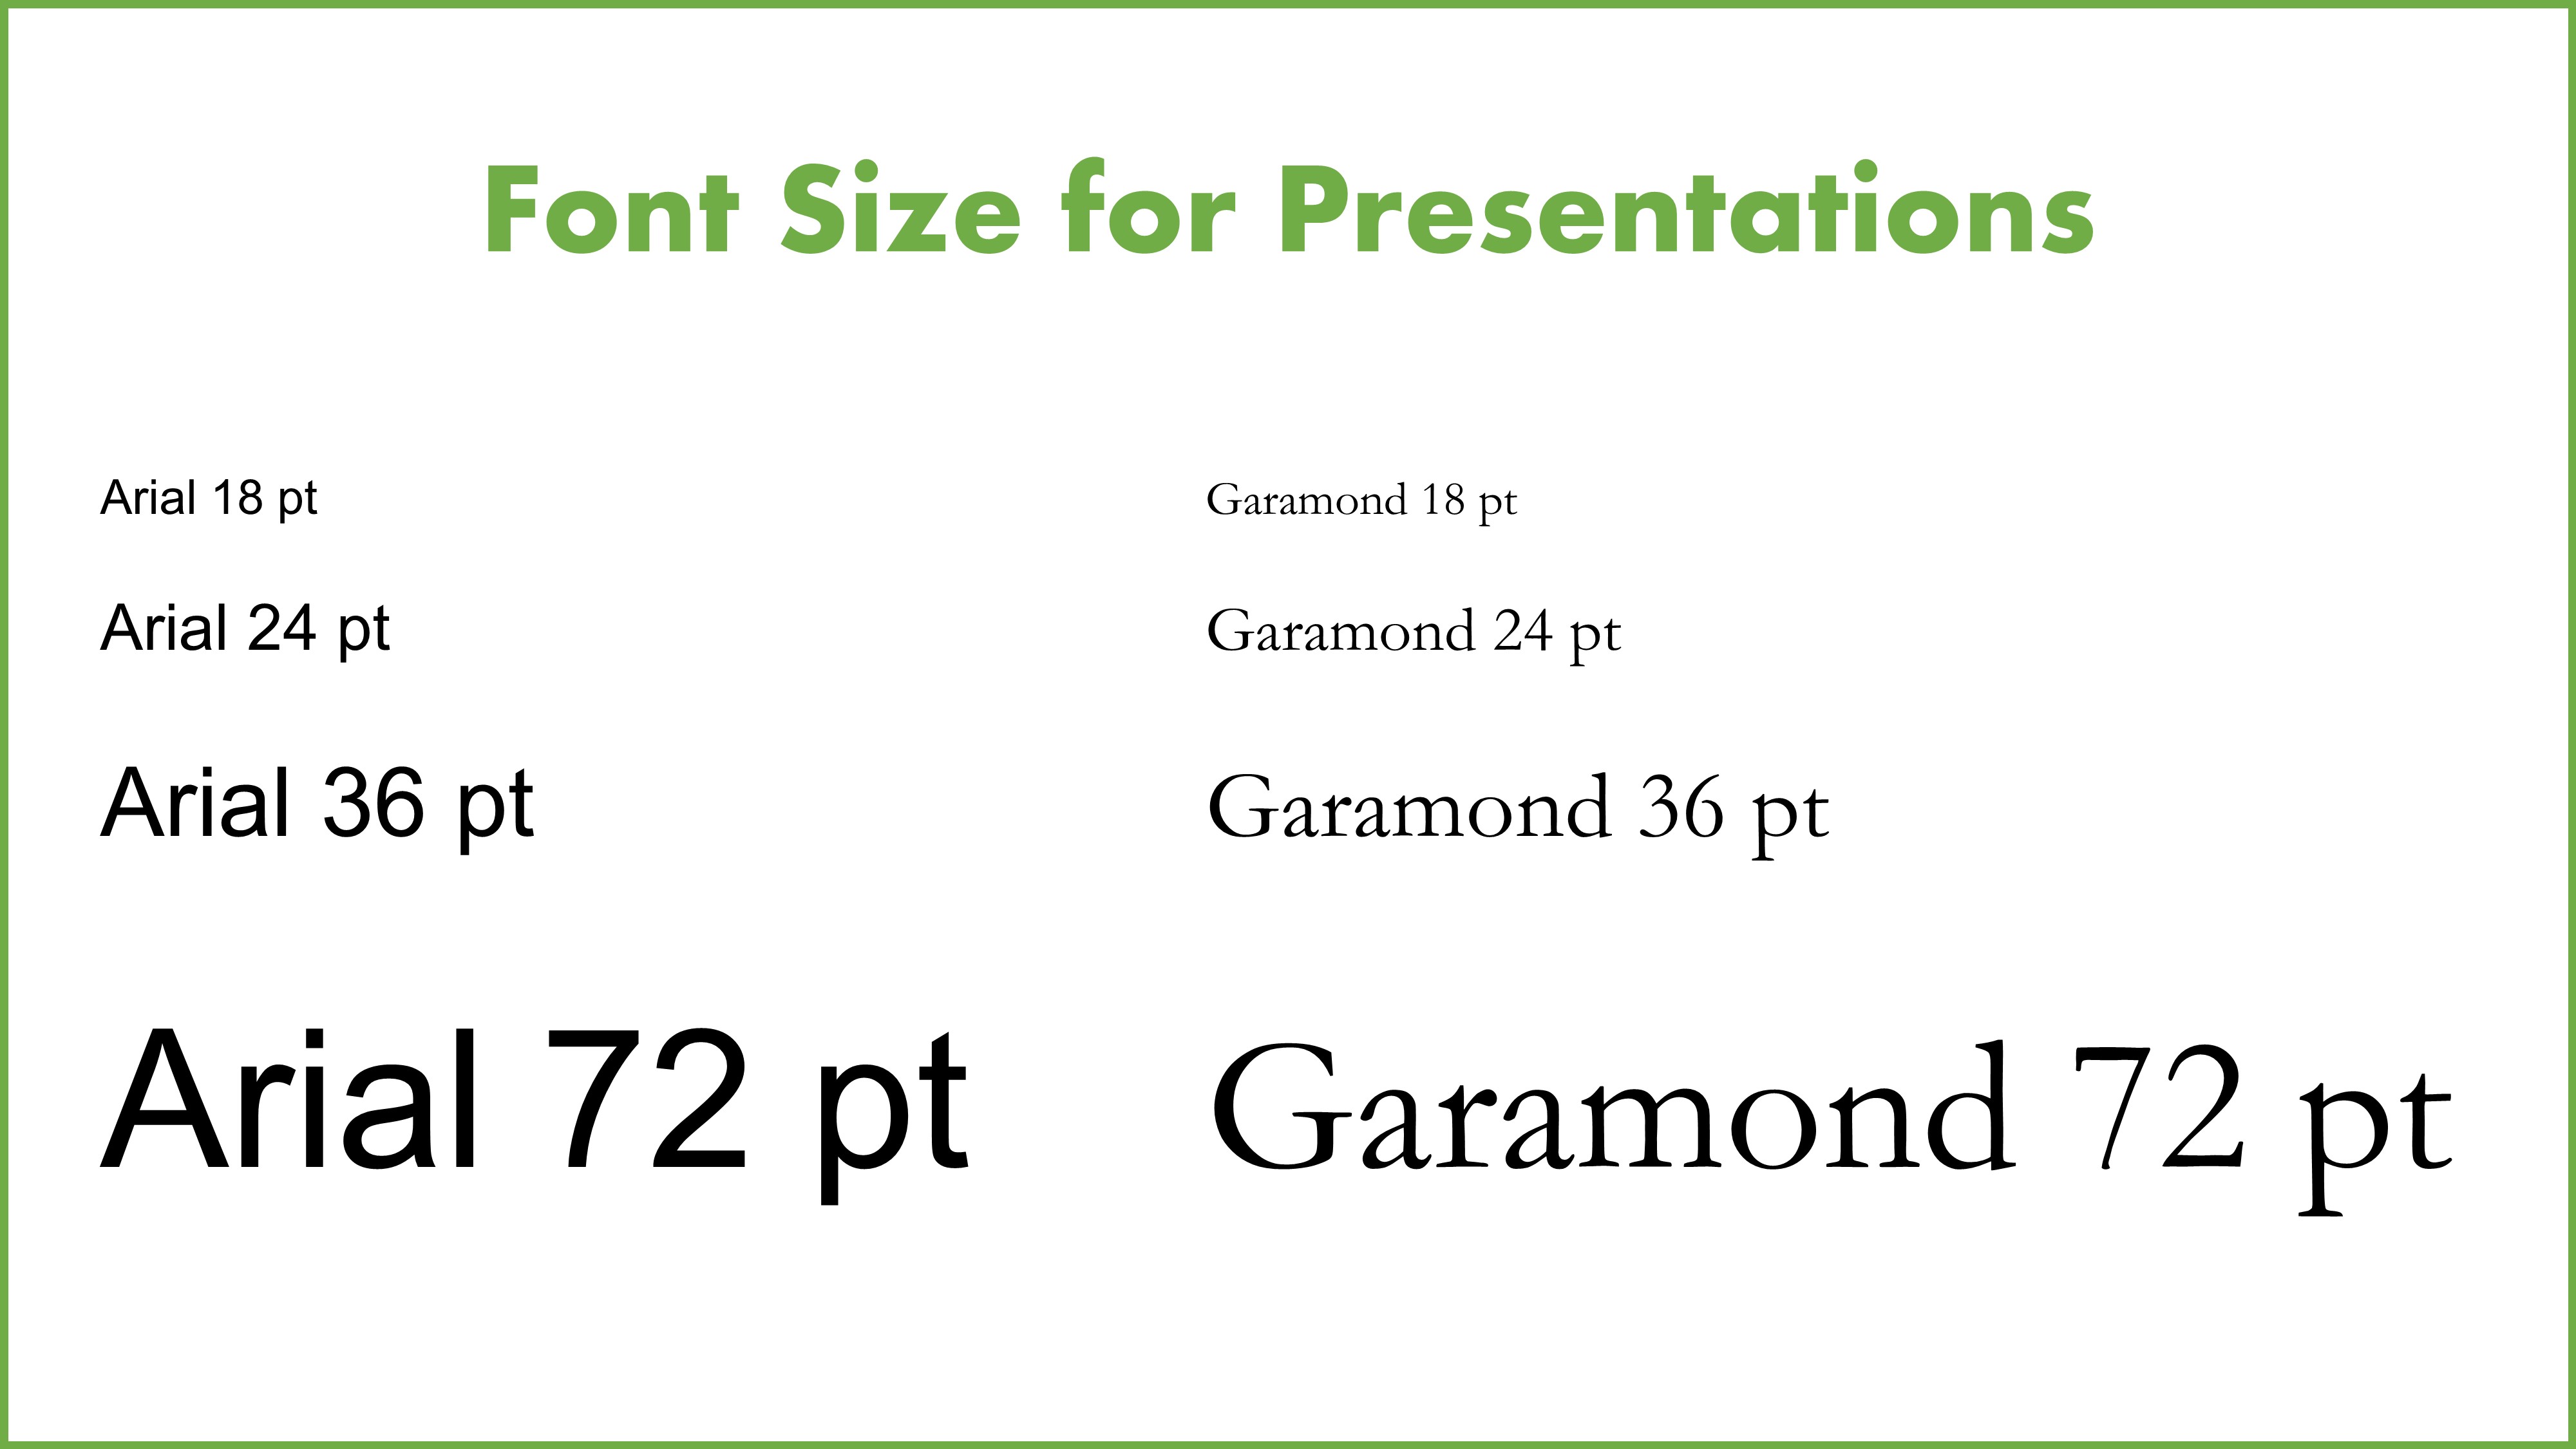 best font to use for powerpoint presentations